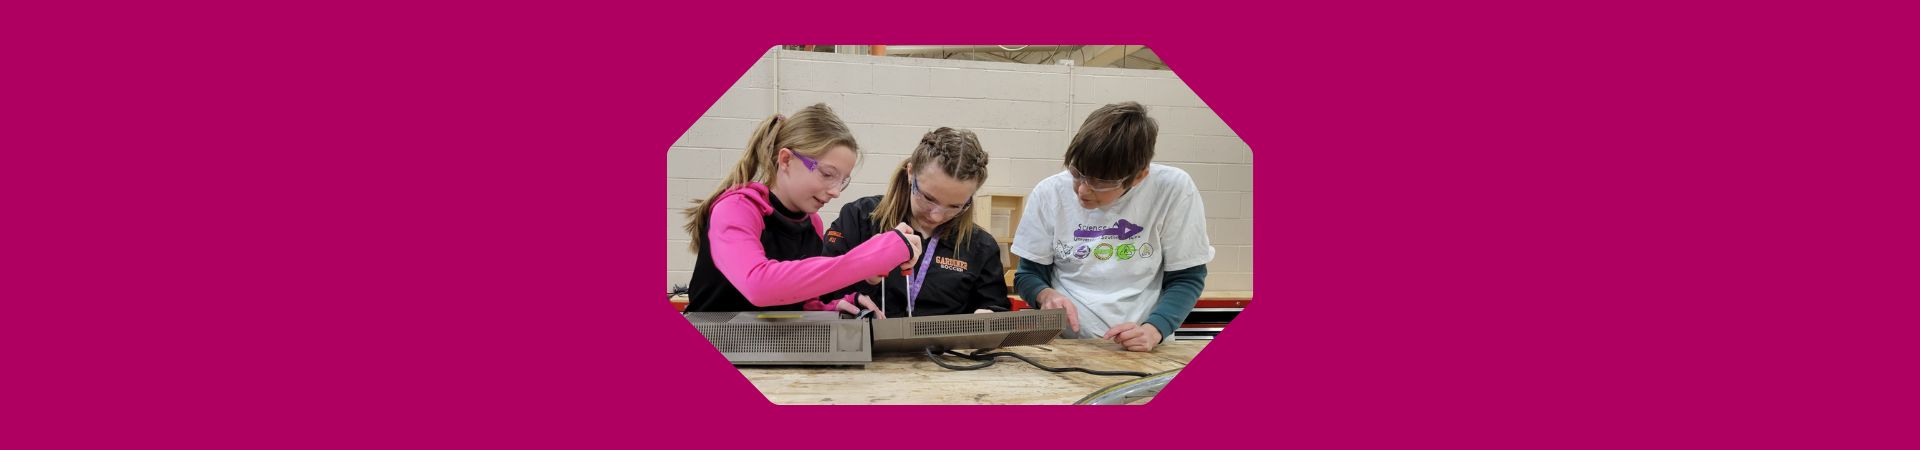  girls working on taking apart an object 